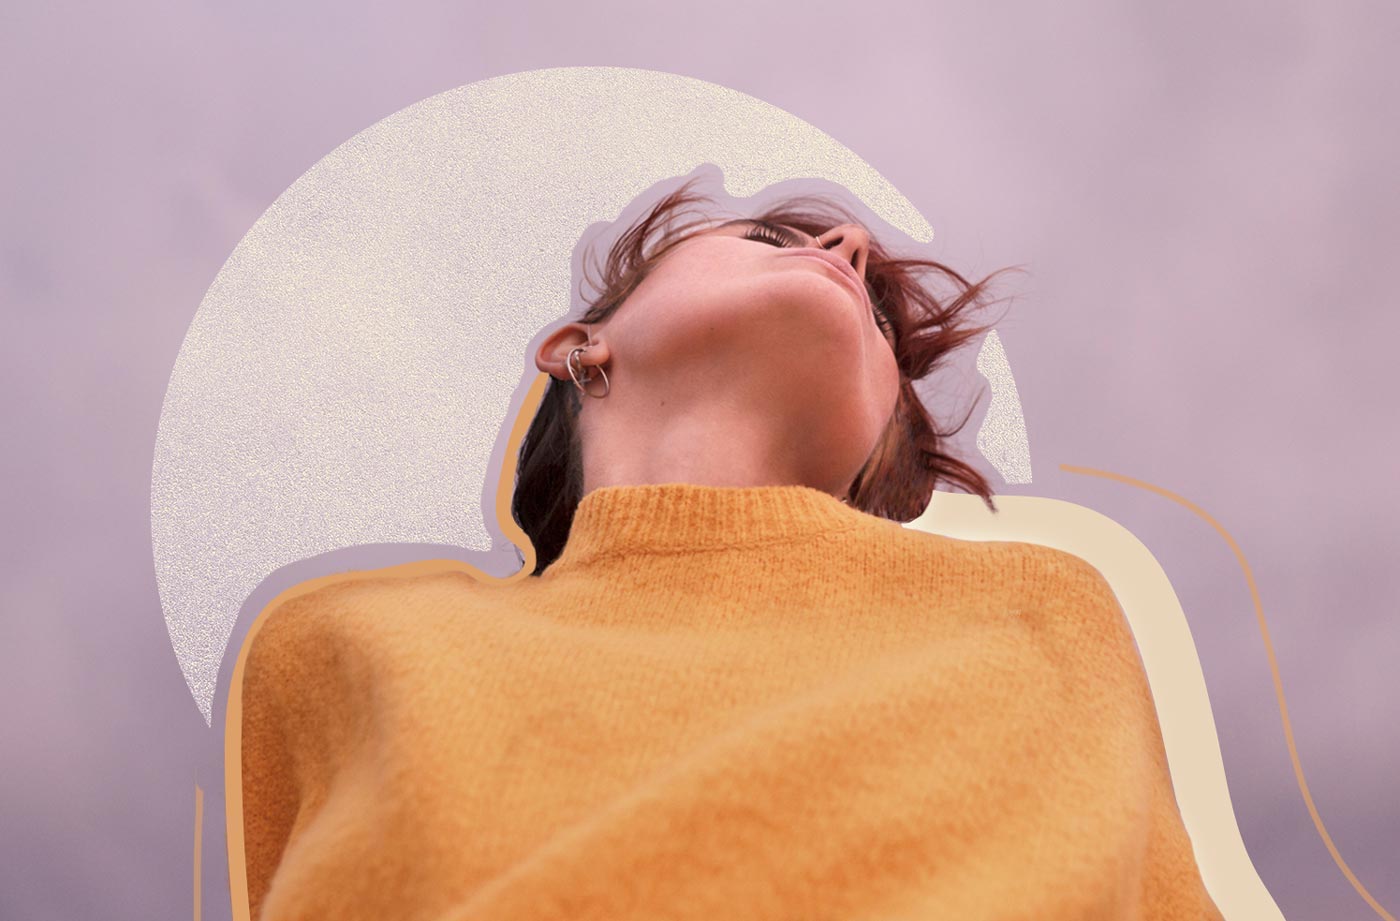 A woman in an orange sweater lies down and is set against a purple and white background.